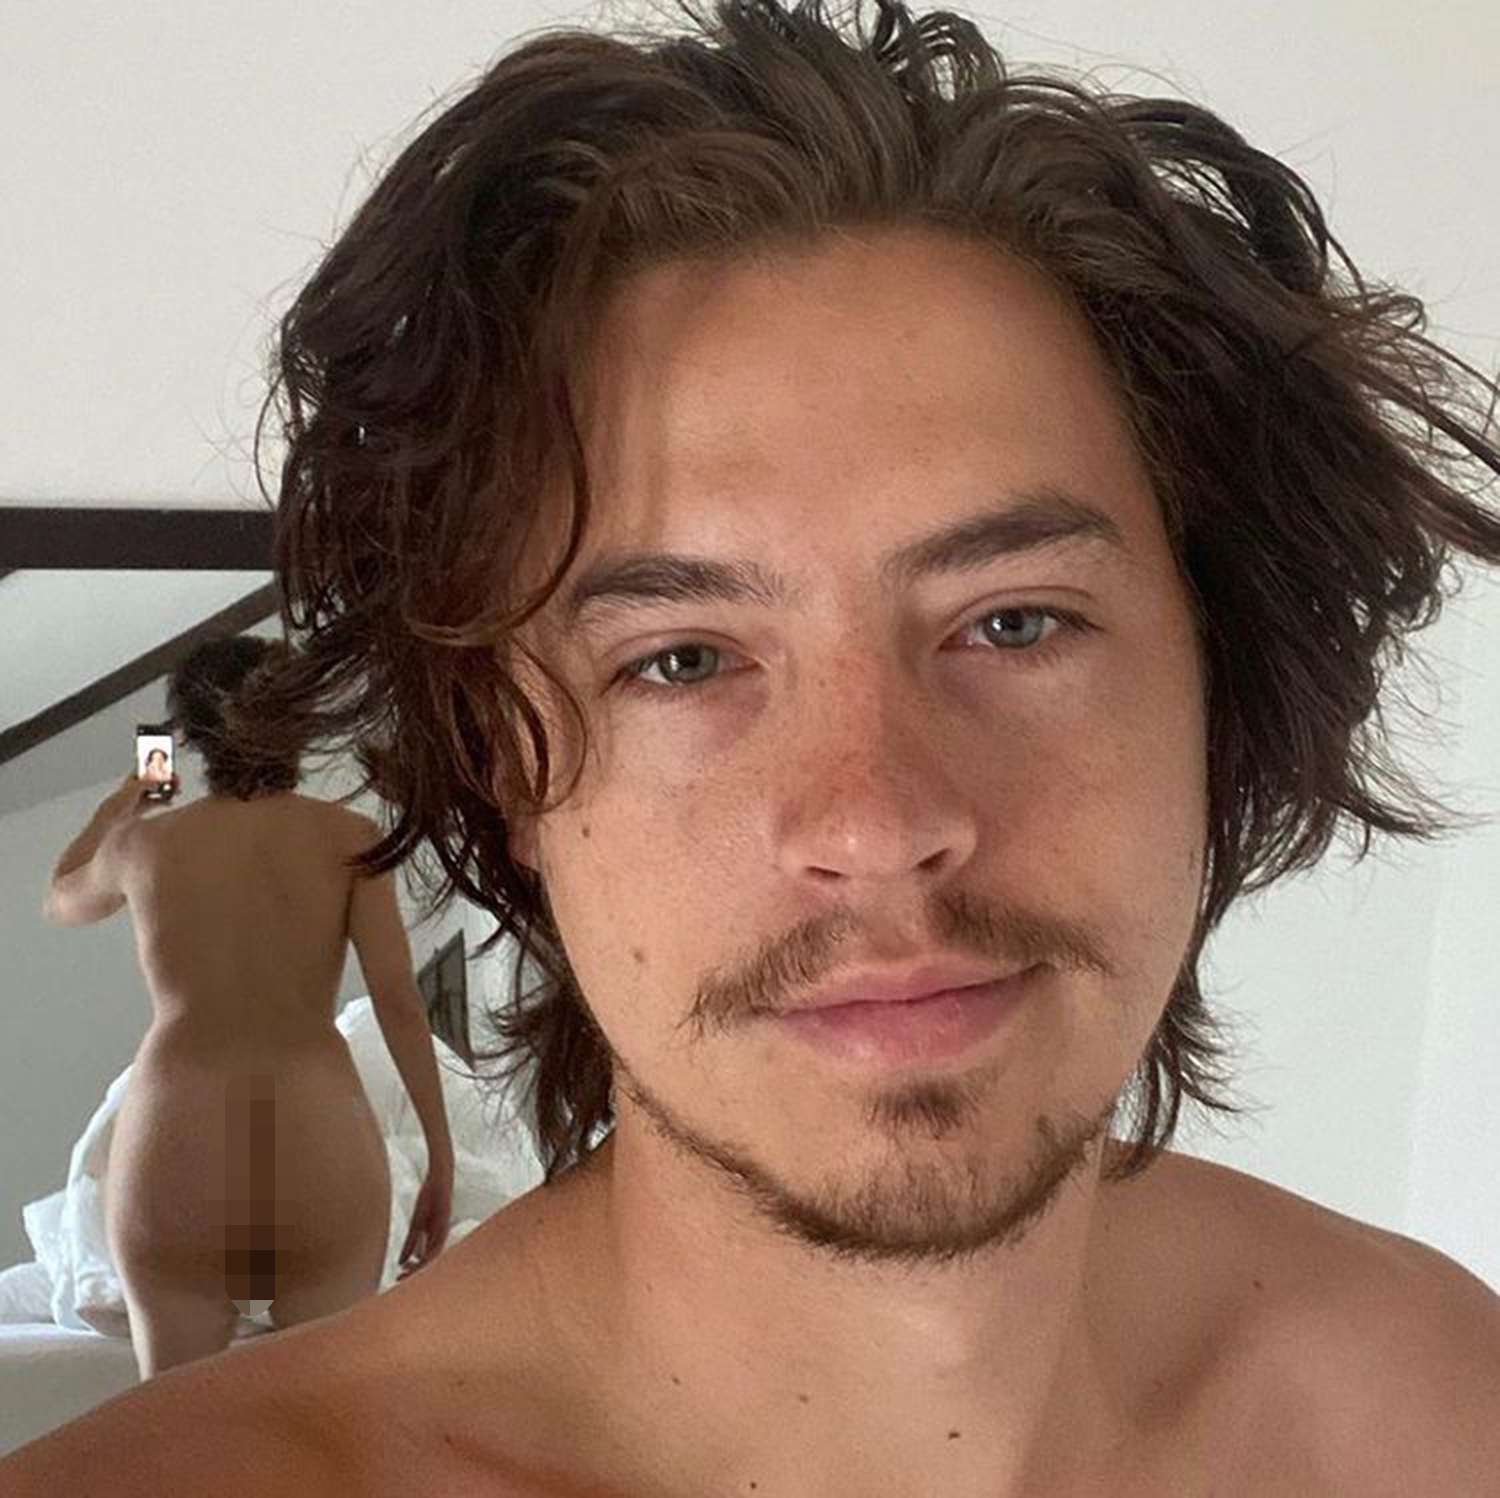 Cole Sprouse Bares His Butt in Cheeky Nude Instagram Pic: 'Good Morning to My Publicity Team'